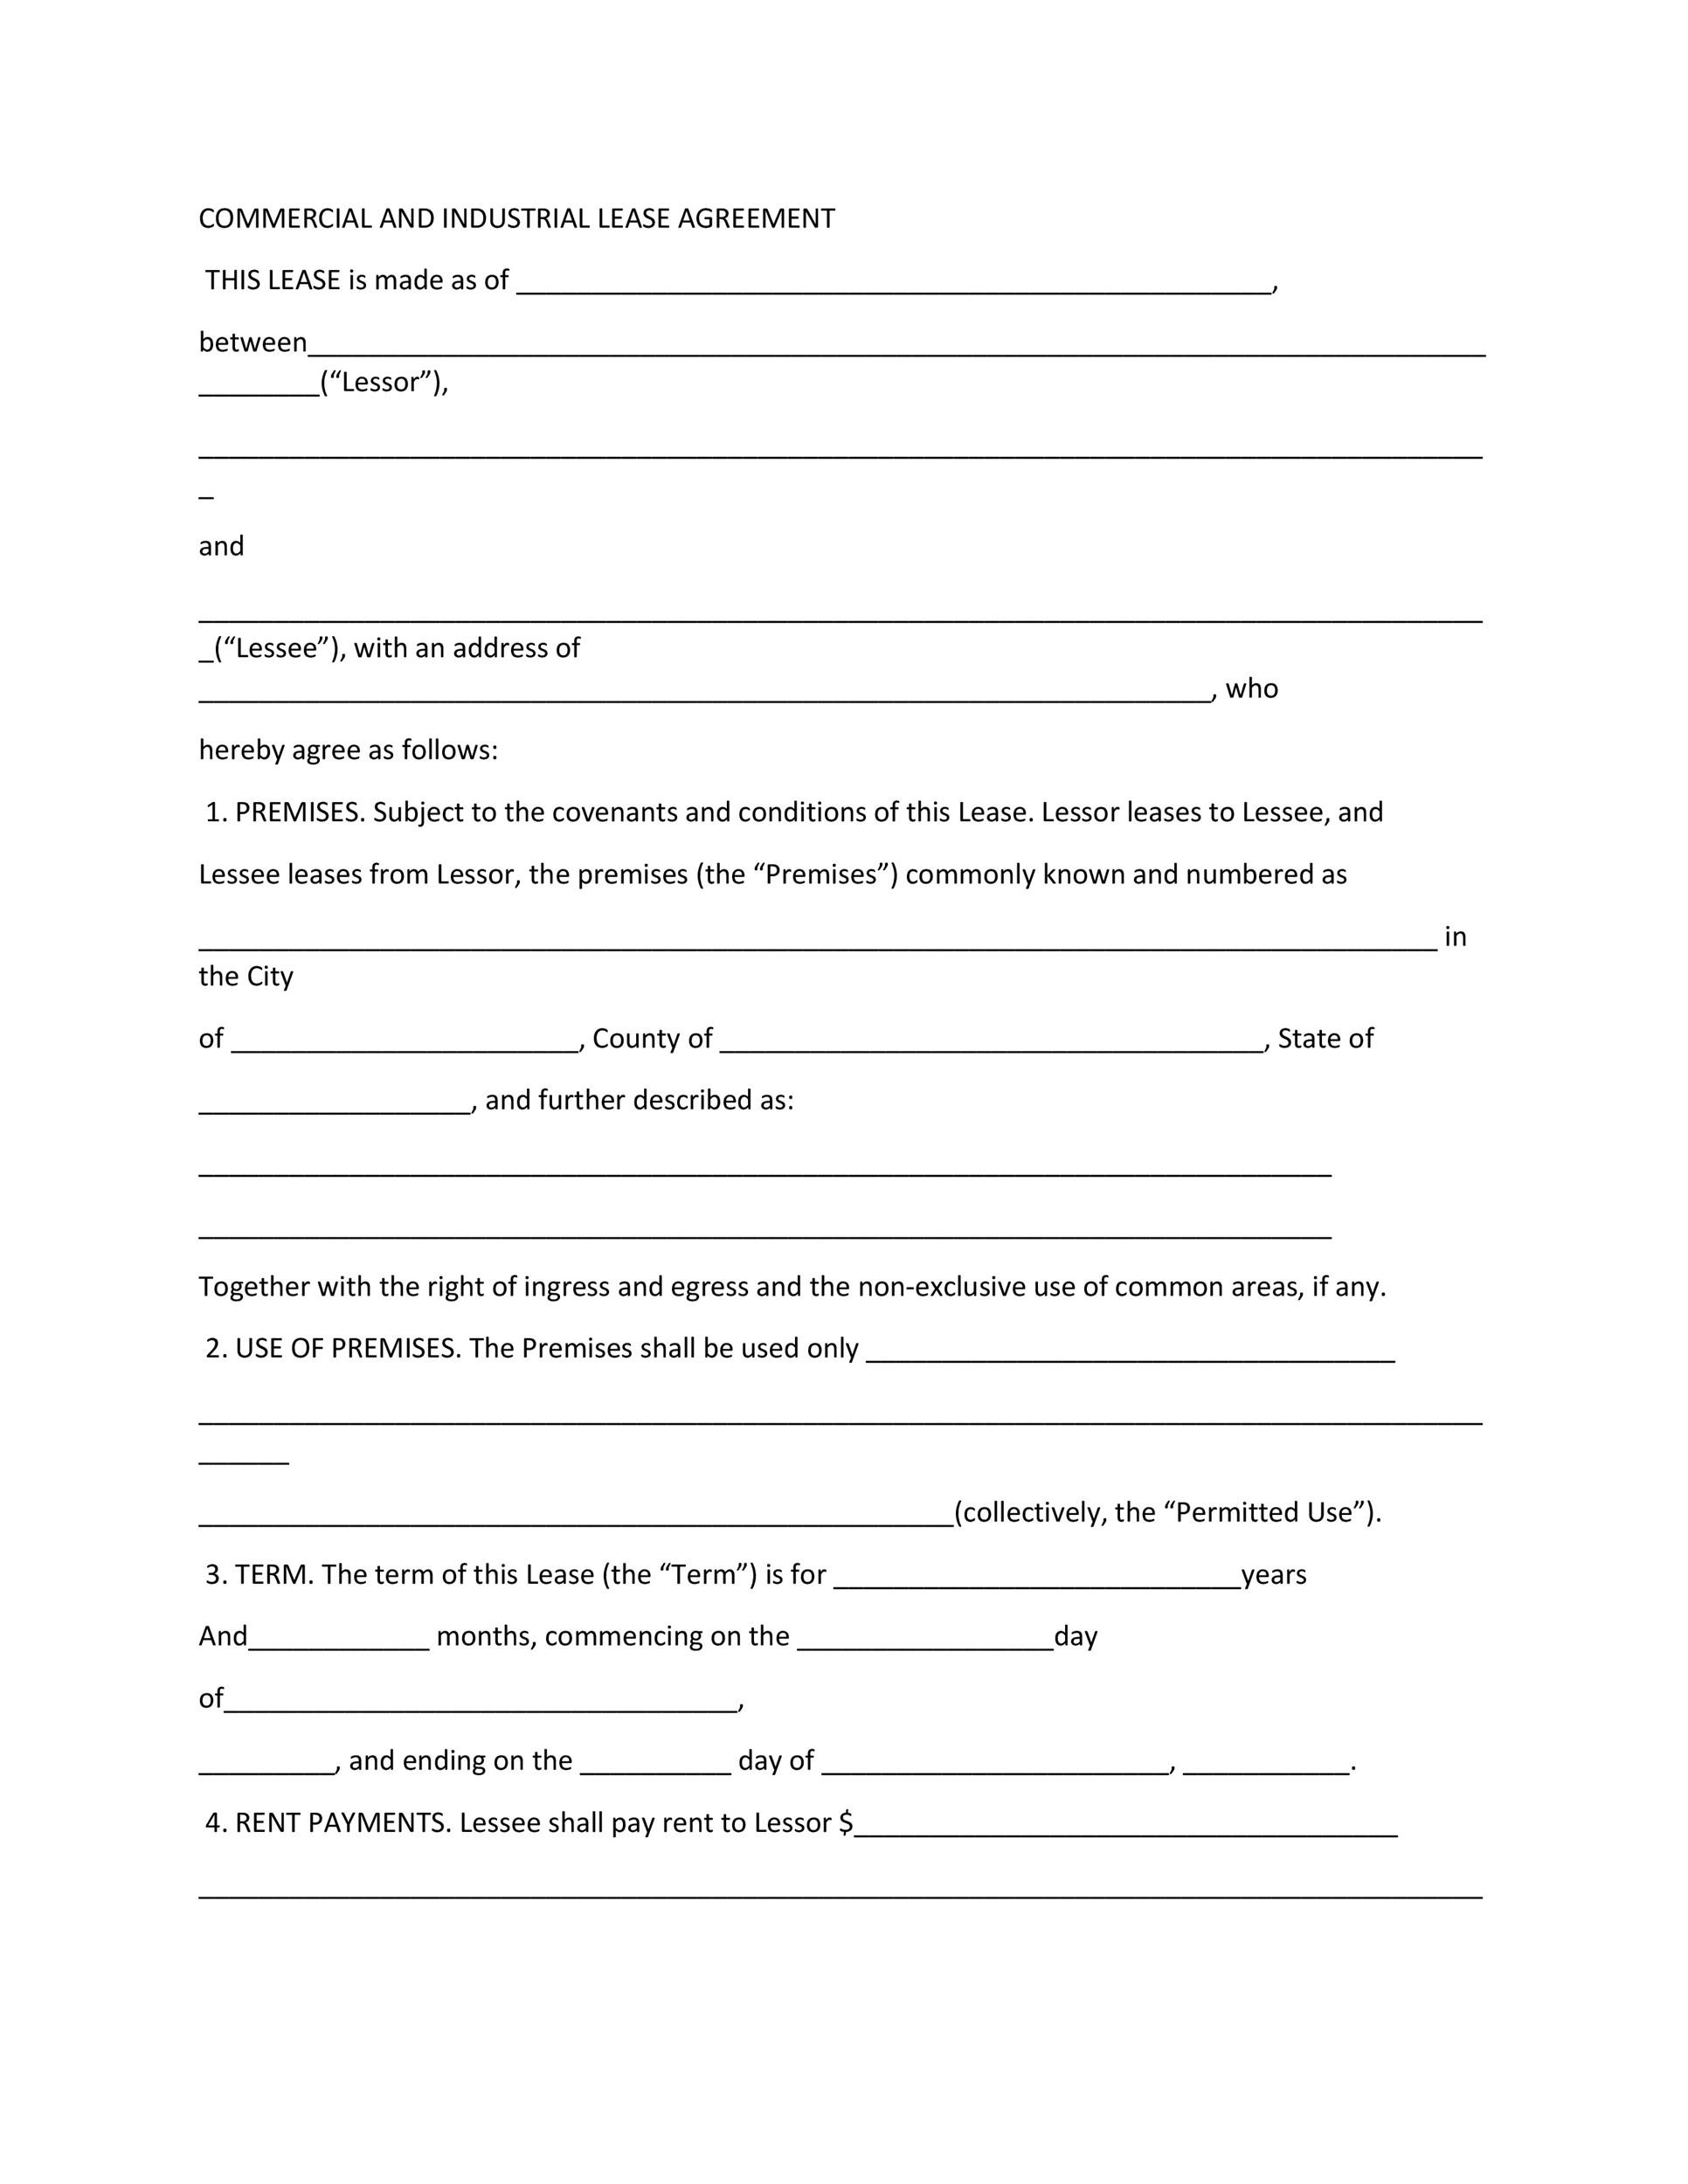 27 Free Commercial Lease Agreement Templates TemplateLab